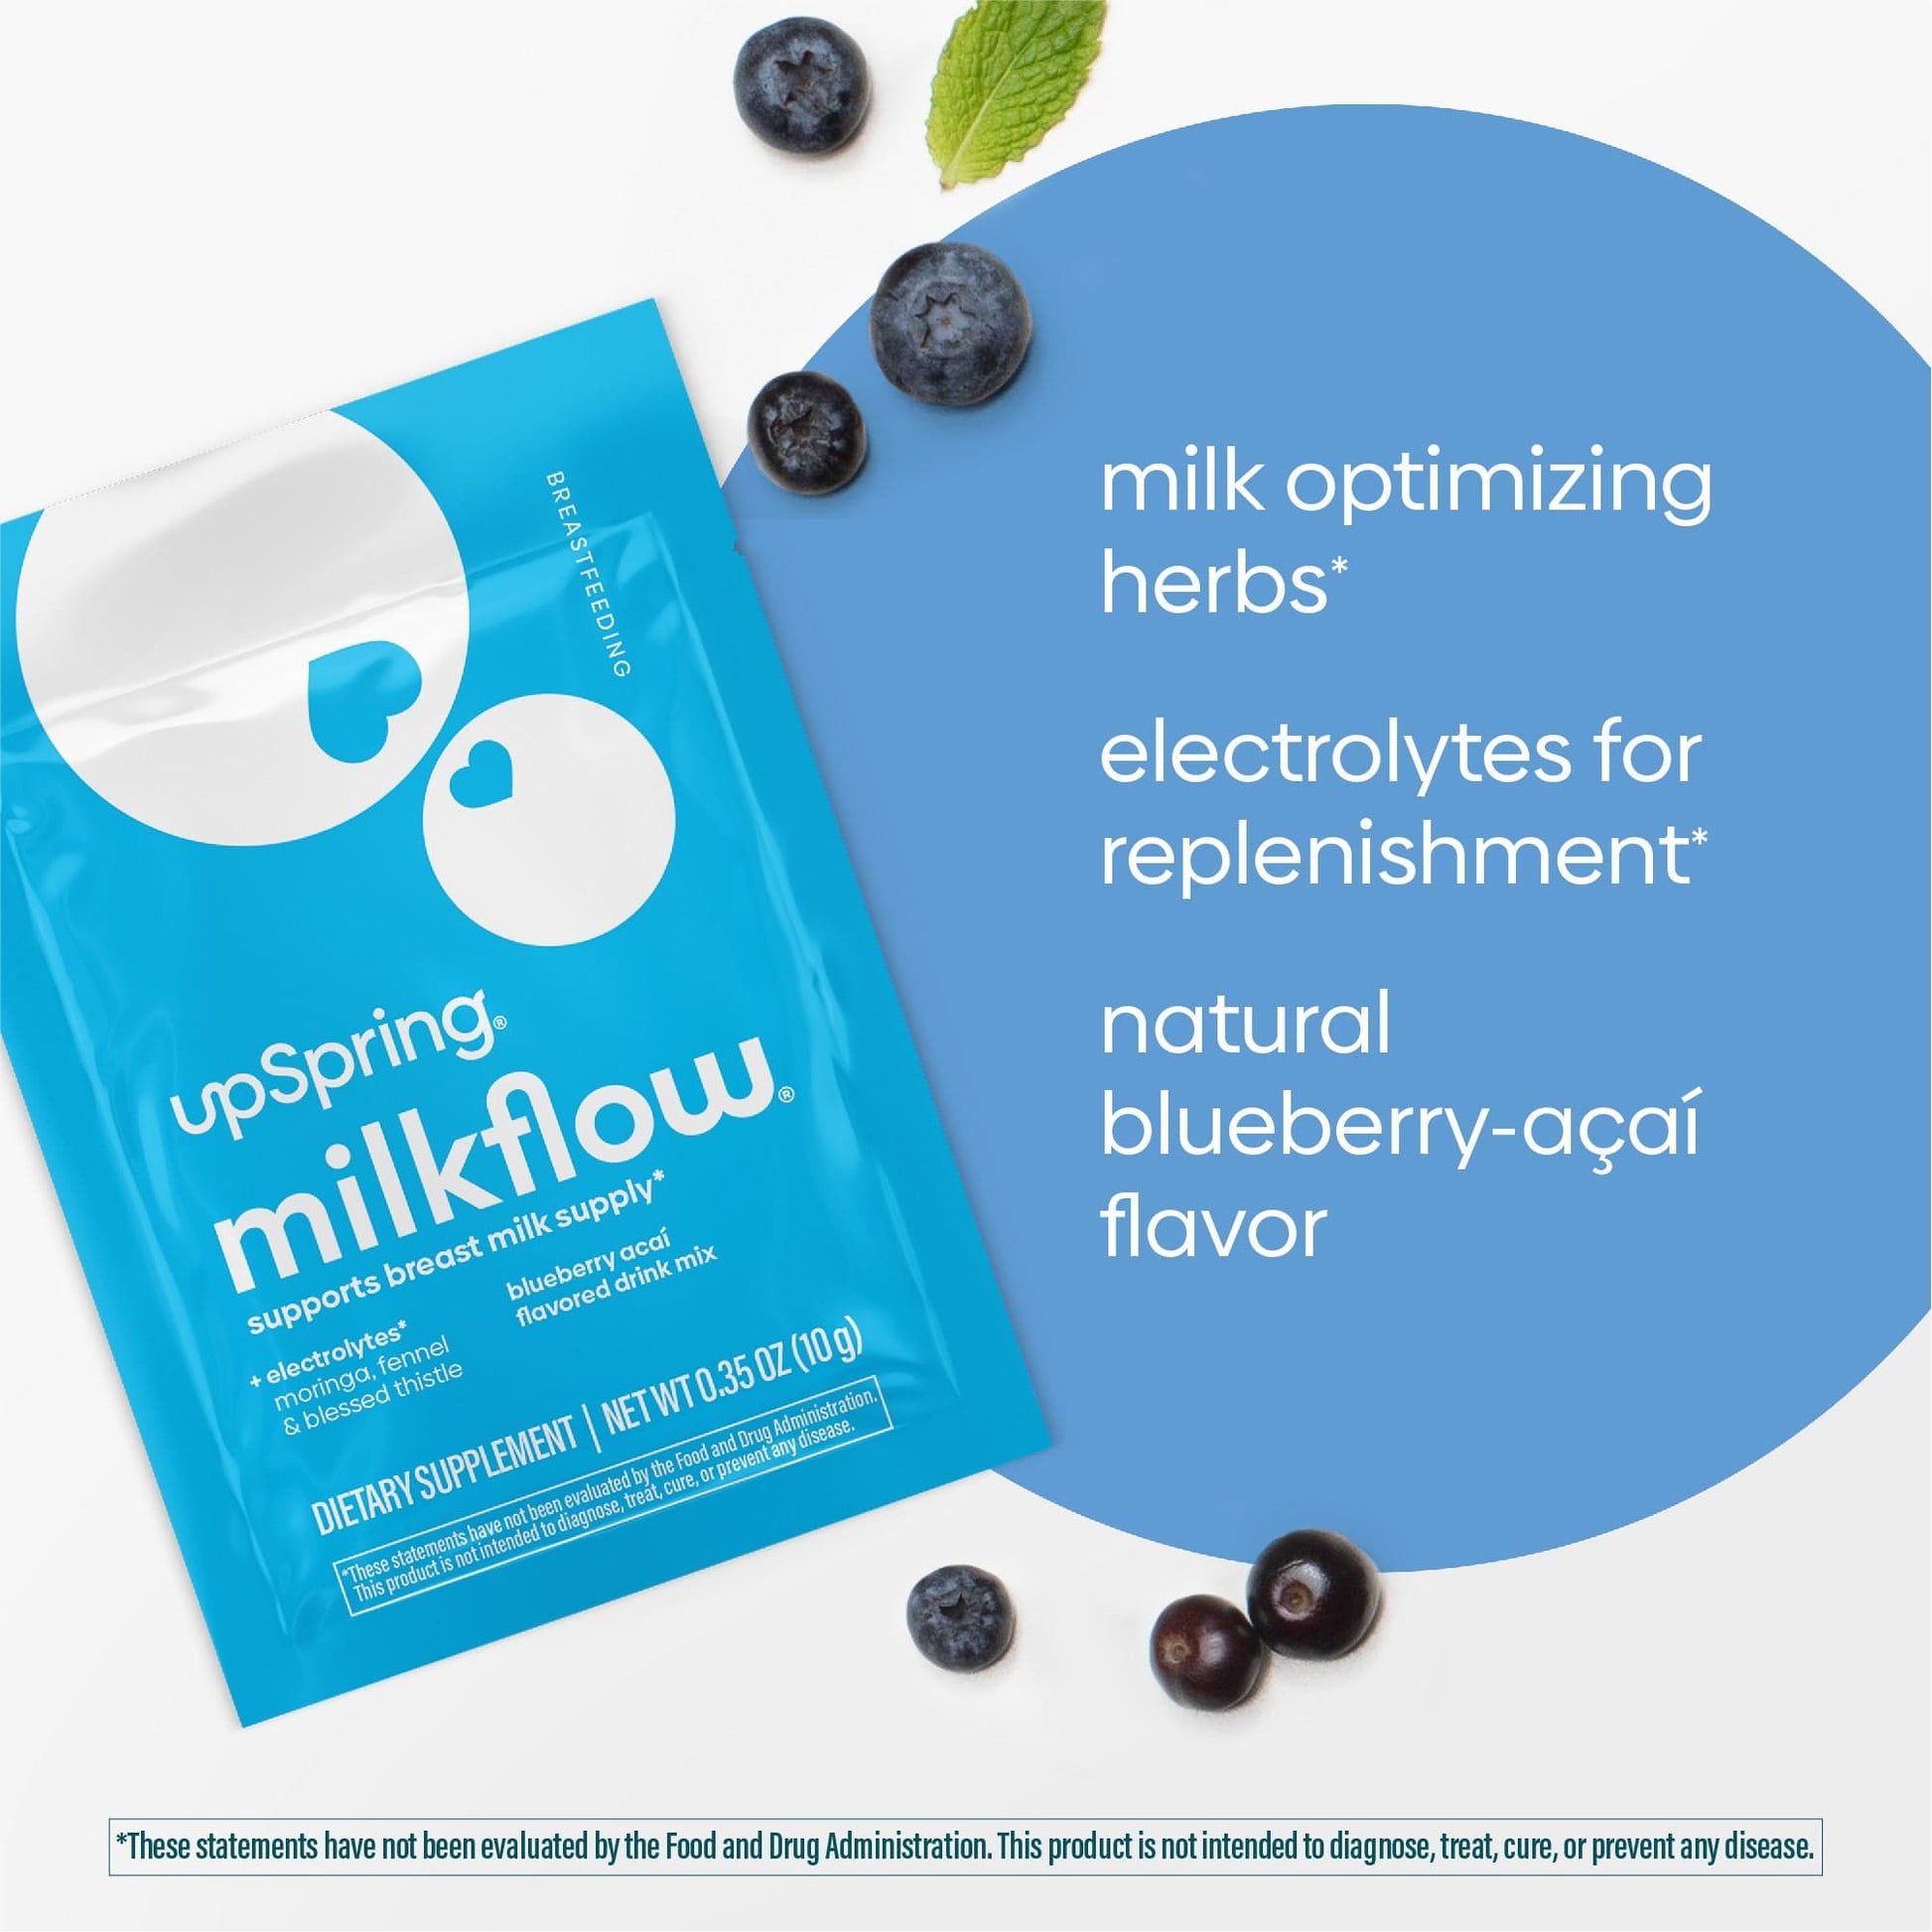 MilkFlow from UpSpring contains electrolytes for replenishment